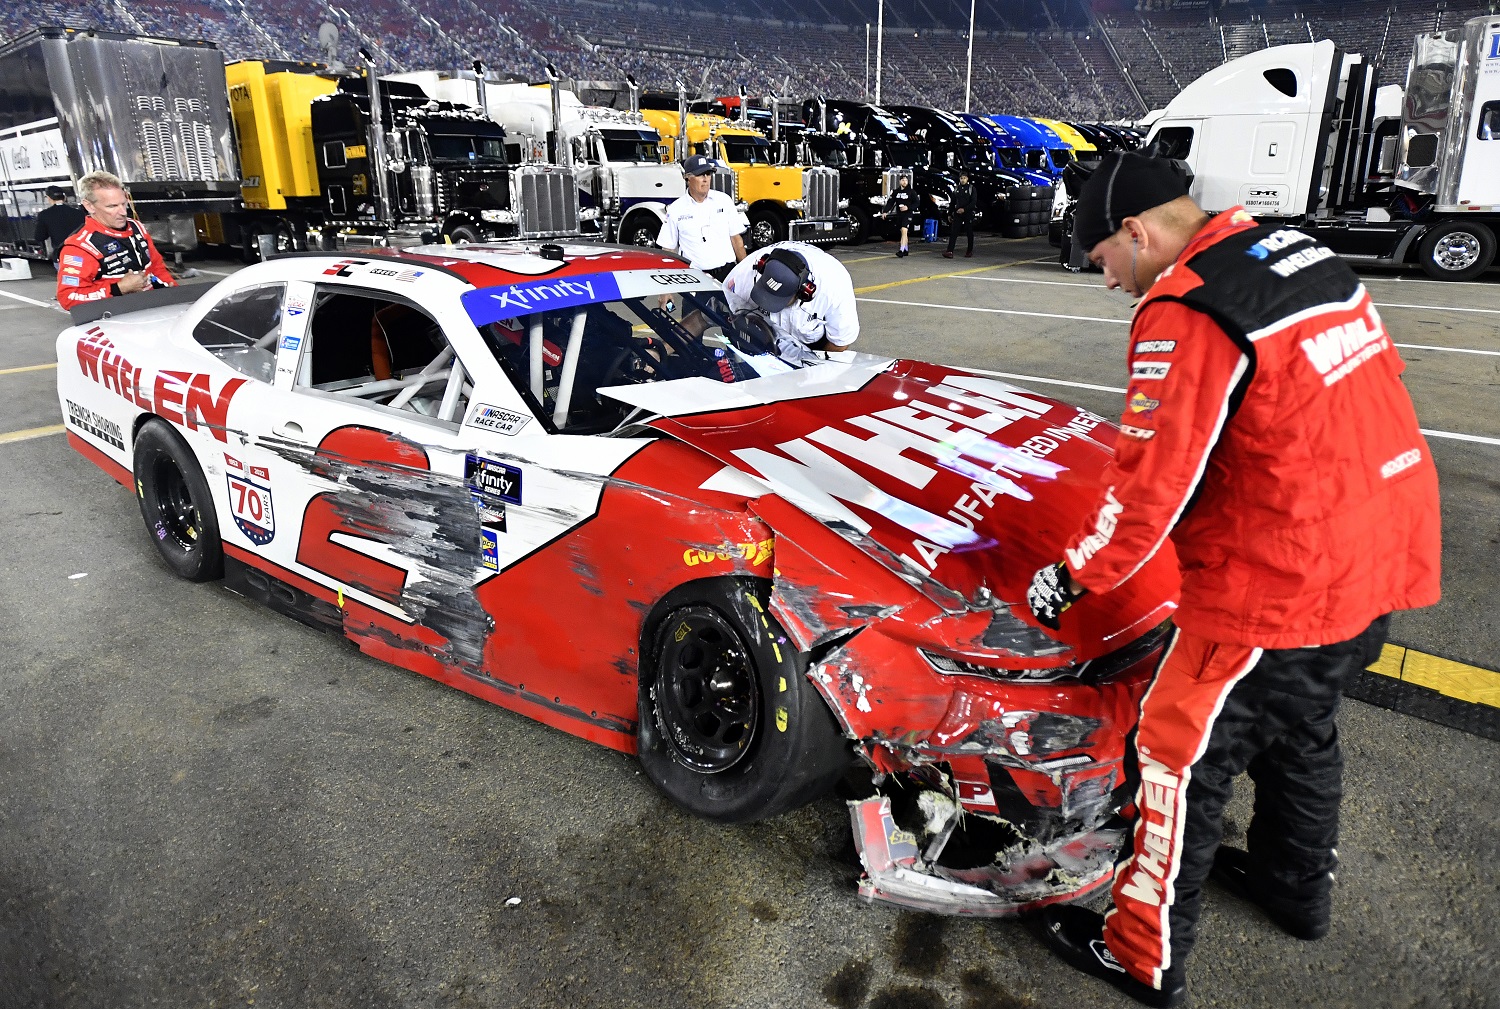 Crew members attend the No. 2 Chevrolet of Sheldon Creed after an on-track incident during the NASCAR Xfinity Series Food City 300 at Bristol Motor Speedway on Sept. 16, 2022. | Logan Riely/Getty Images